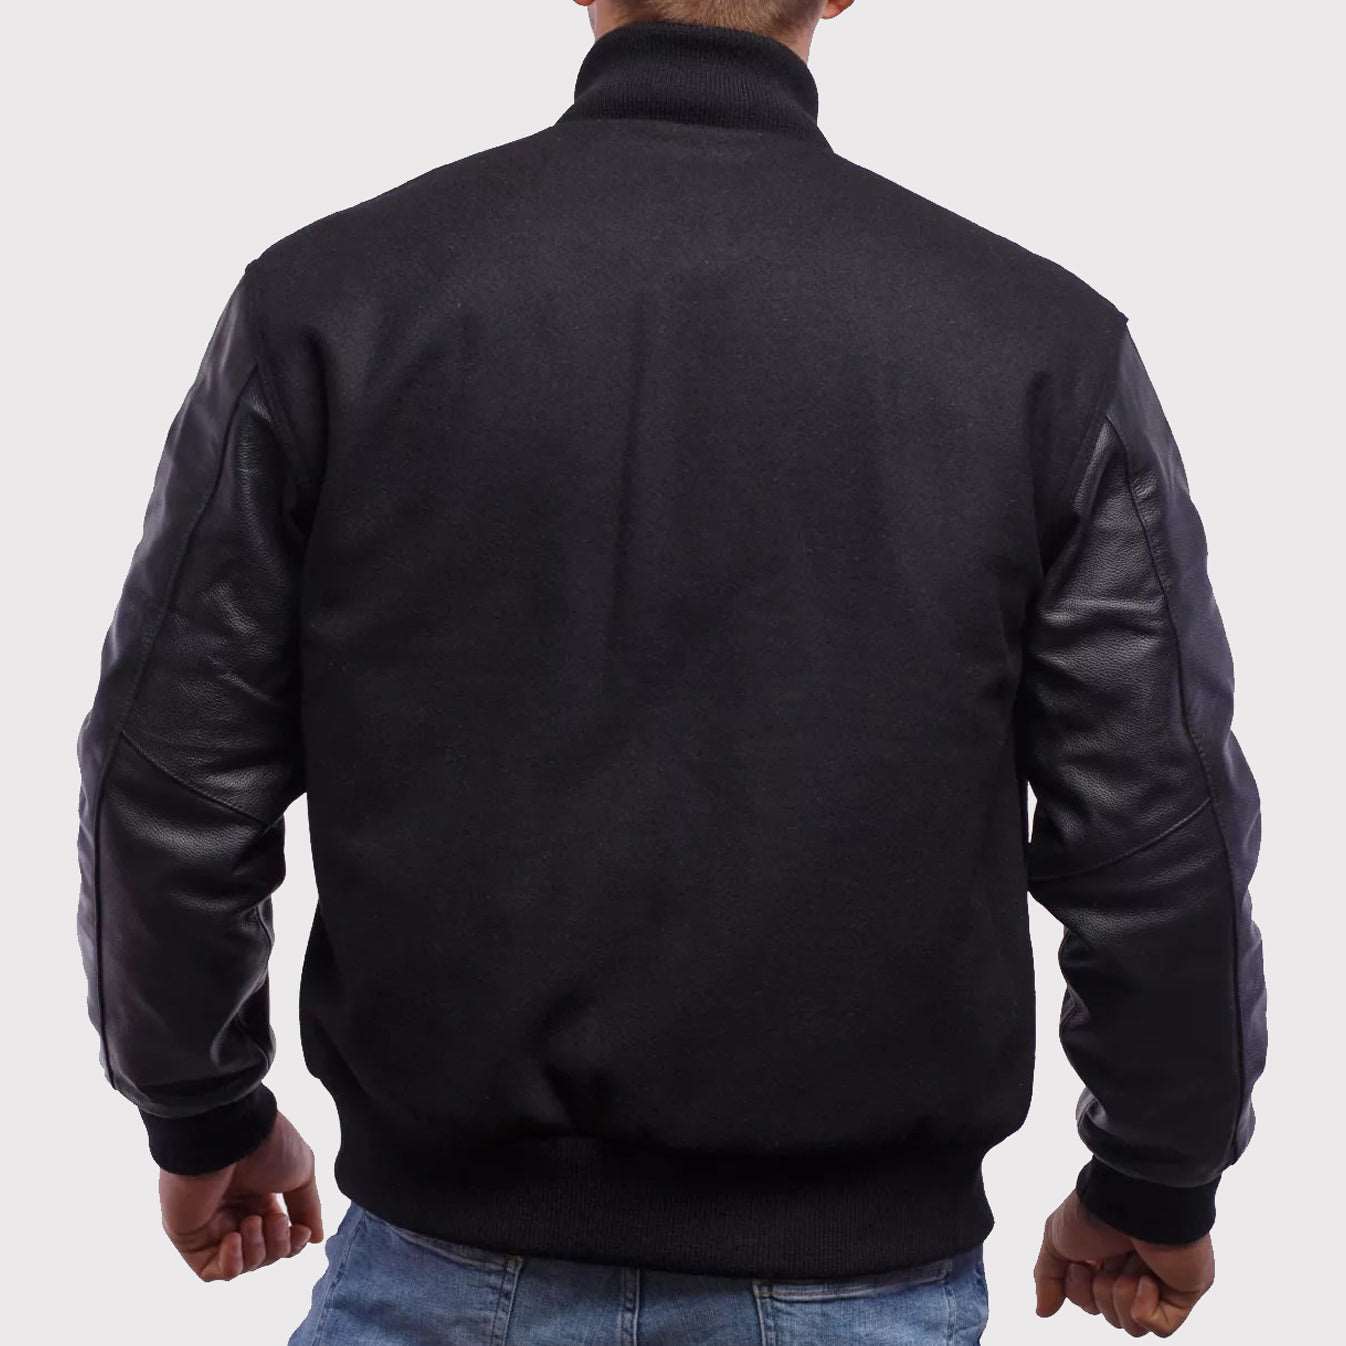 Classic Black Wool Body & Leather Sleeves Letterman Jacket